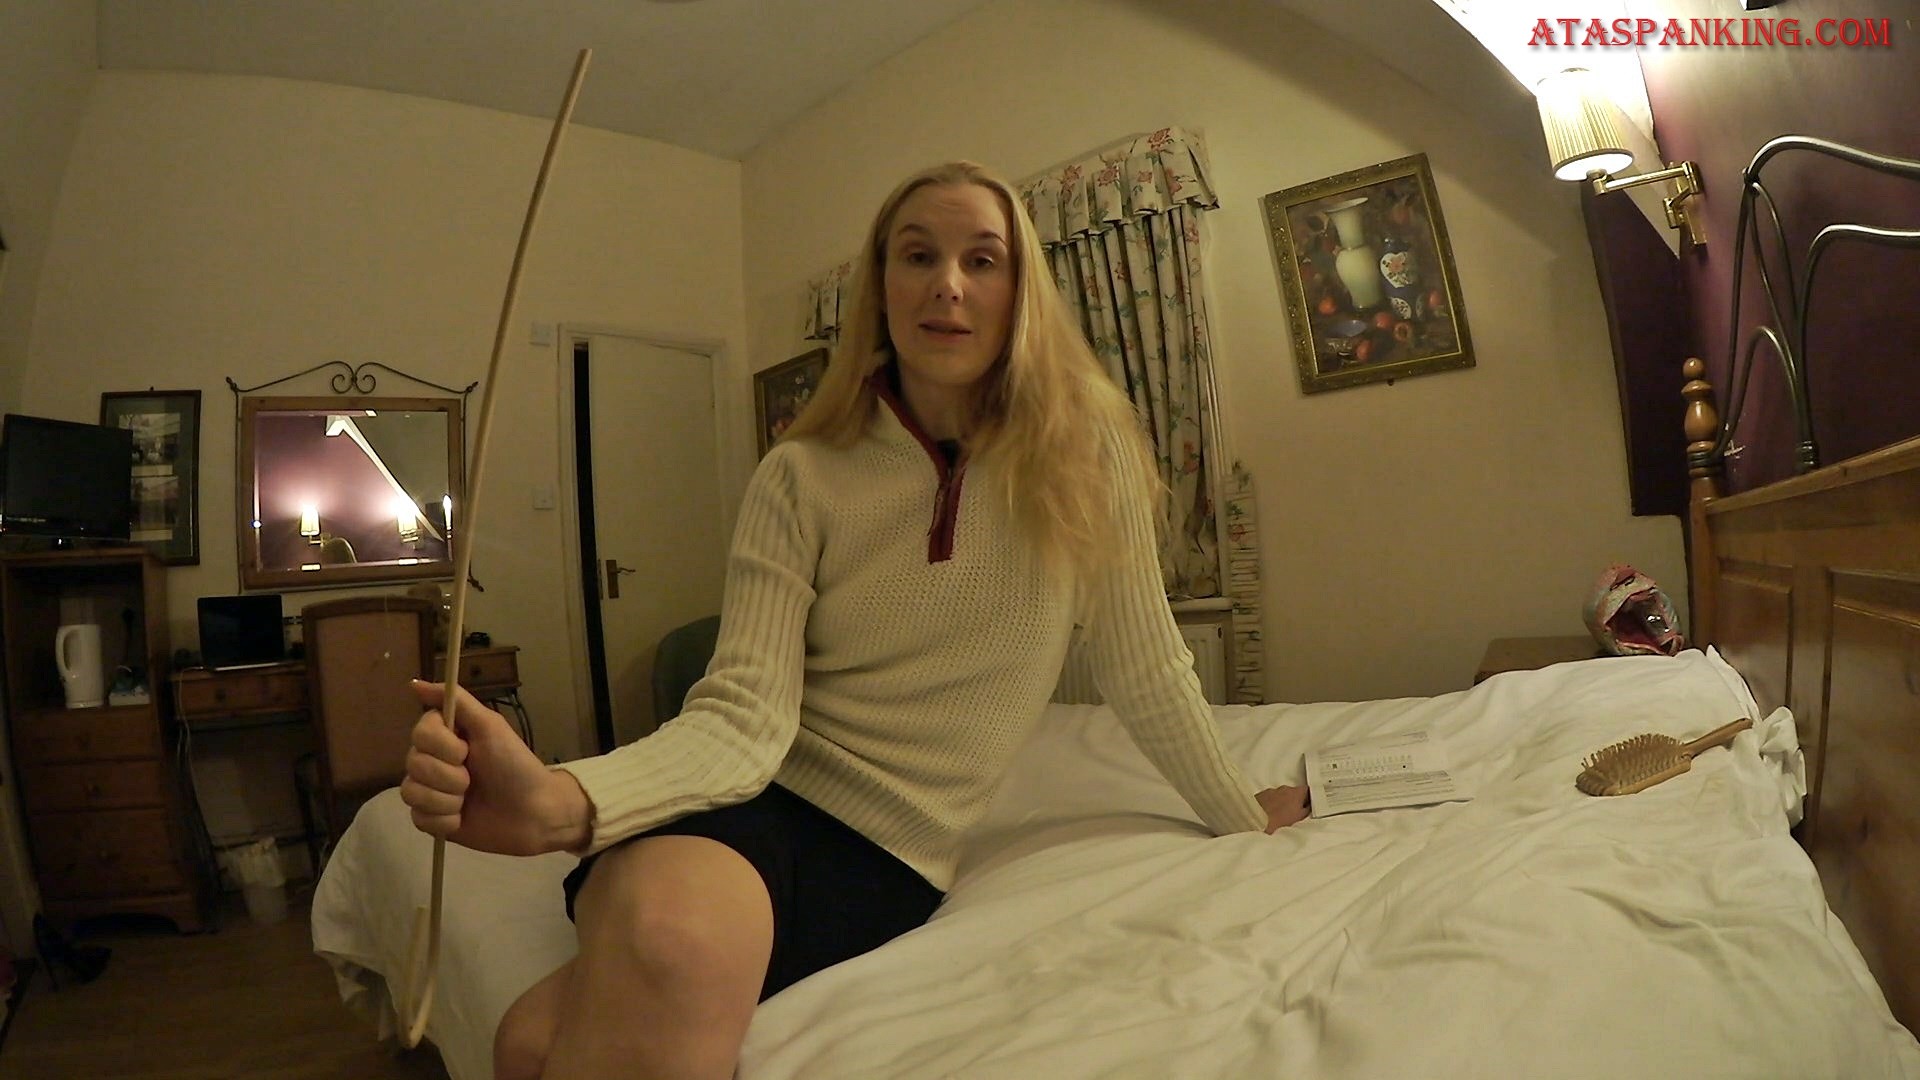 Caning from your Babysitter - Ariel Anderssen Studio - ataspanking.